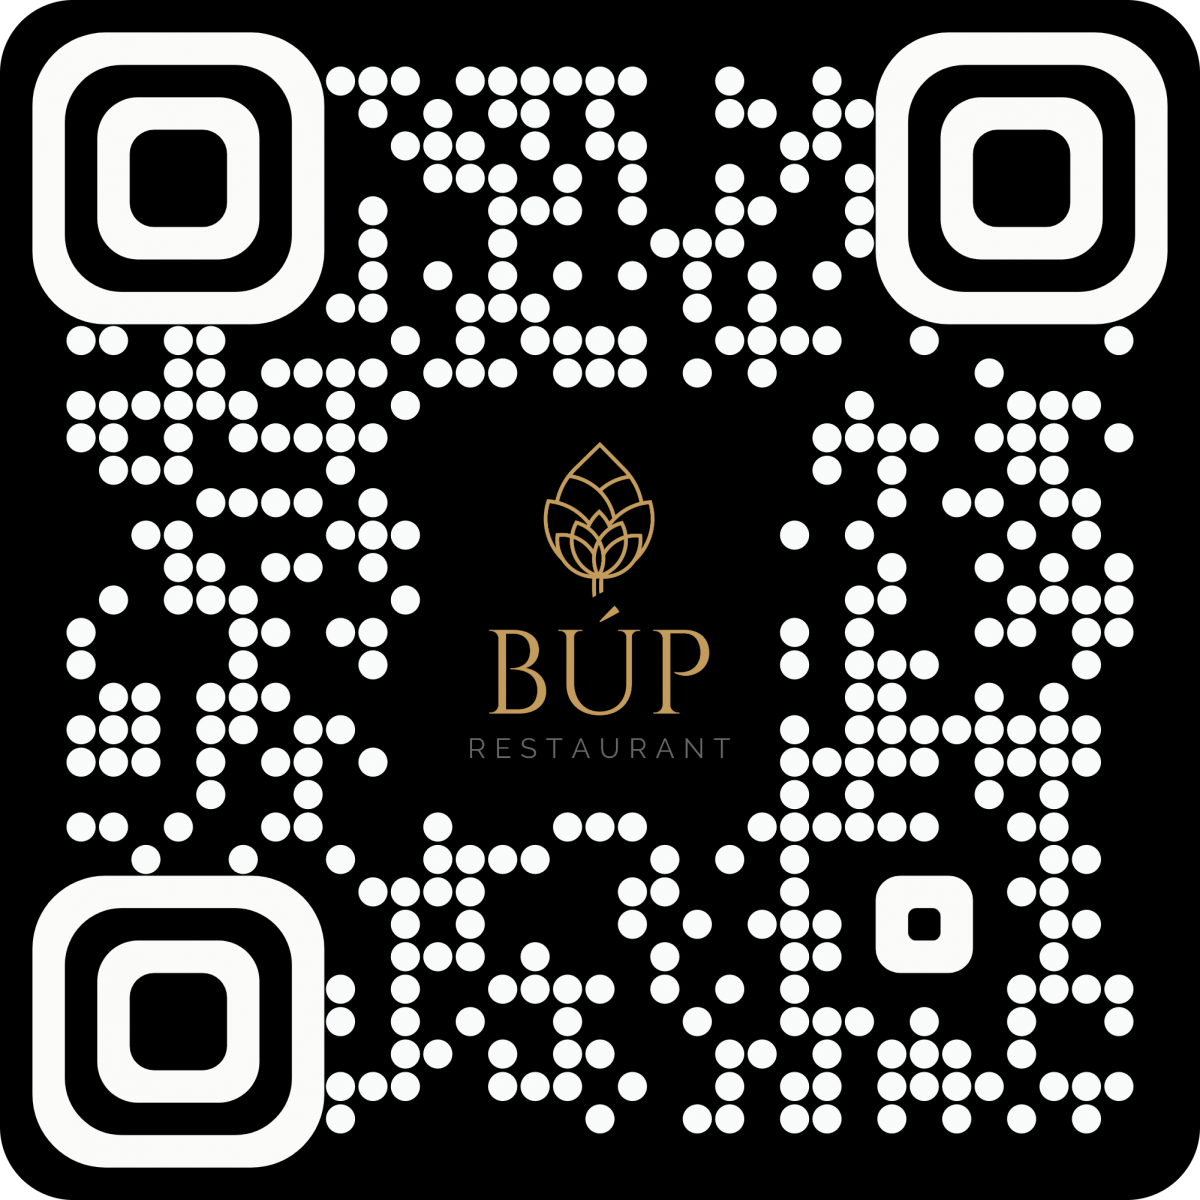 Taste the world with the new menu at Bup Restaurant